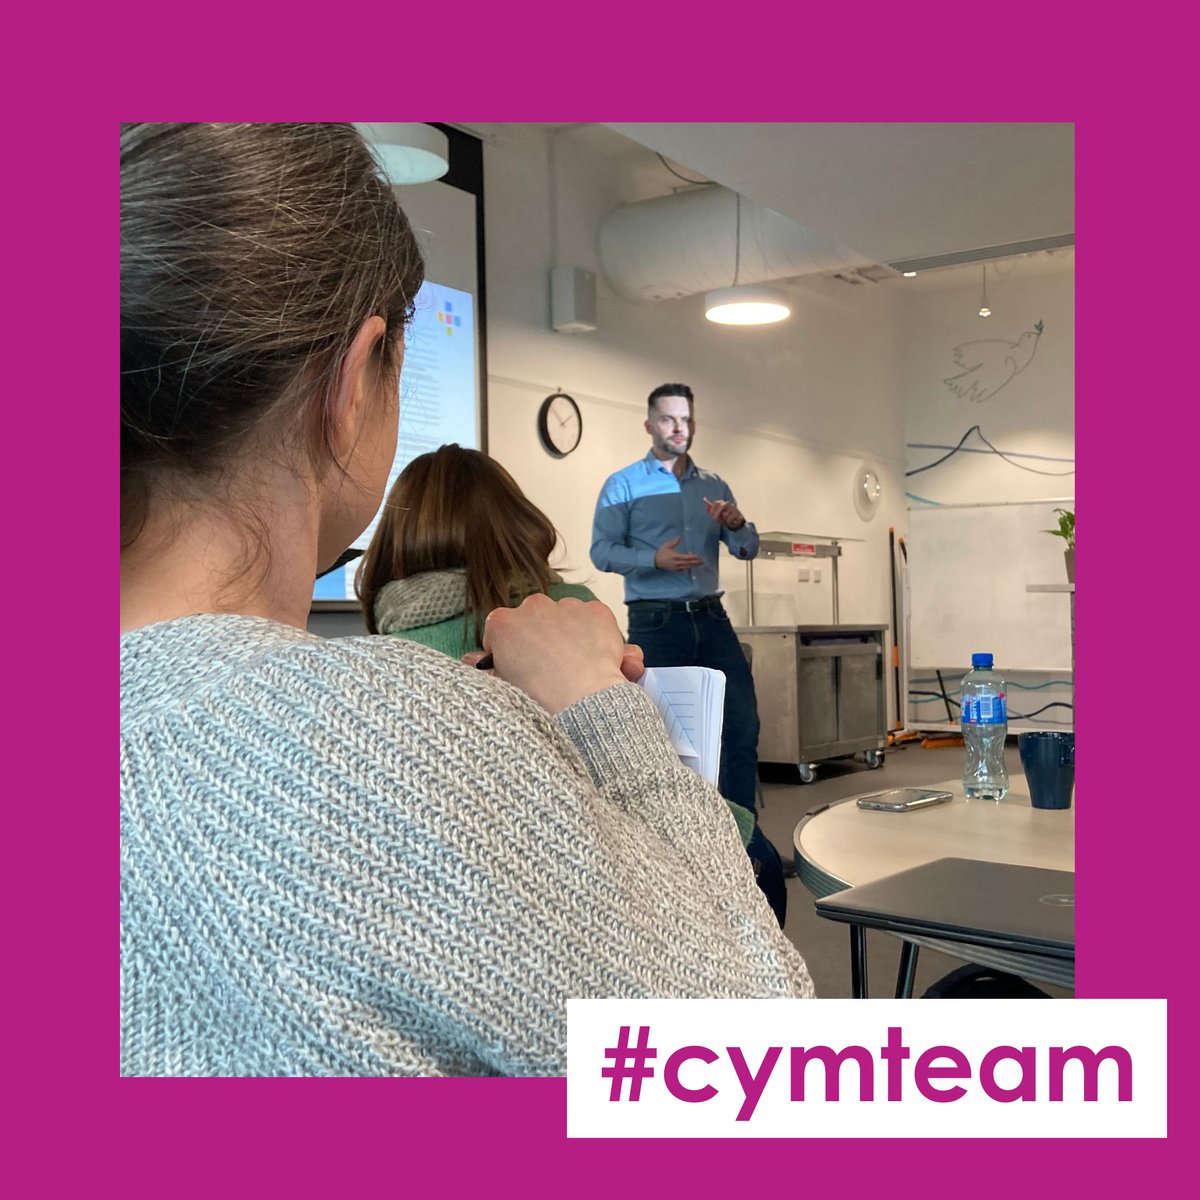 We're having a great team day with our staff at CYM - sooo good! Scott Halligan, our Director of C.R.E, helping us with how we connect - we’re excited to grow in how we serve you and how we engage together in building the kingdom.